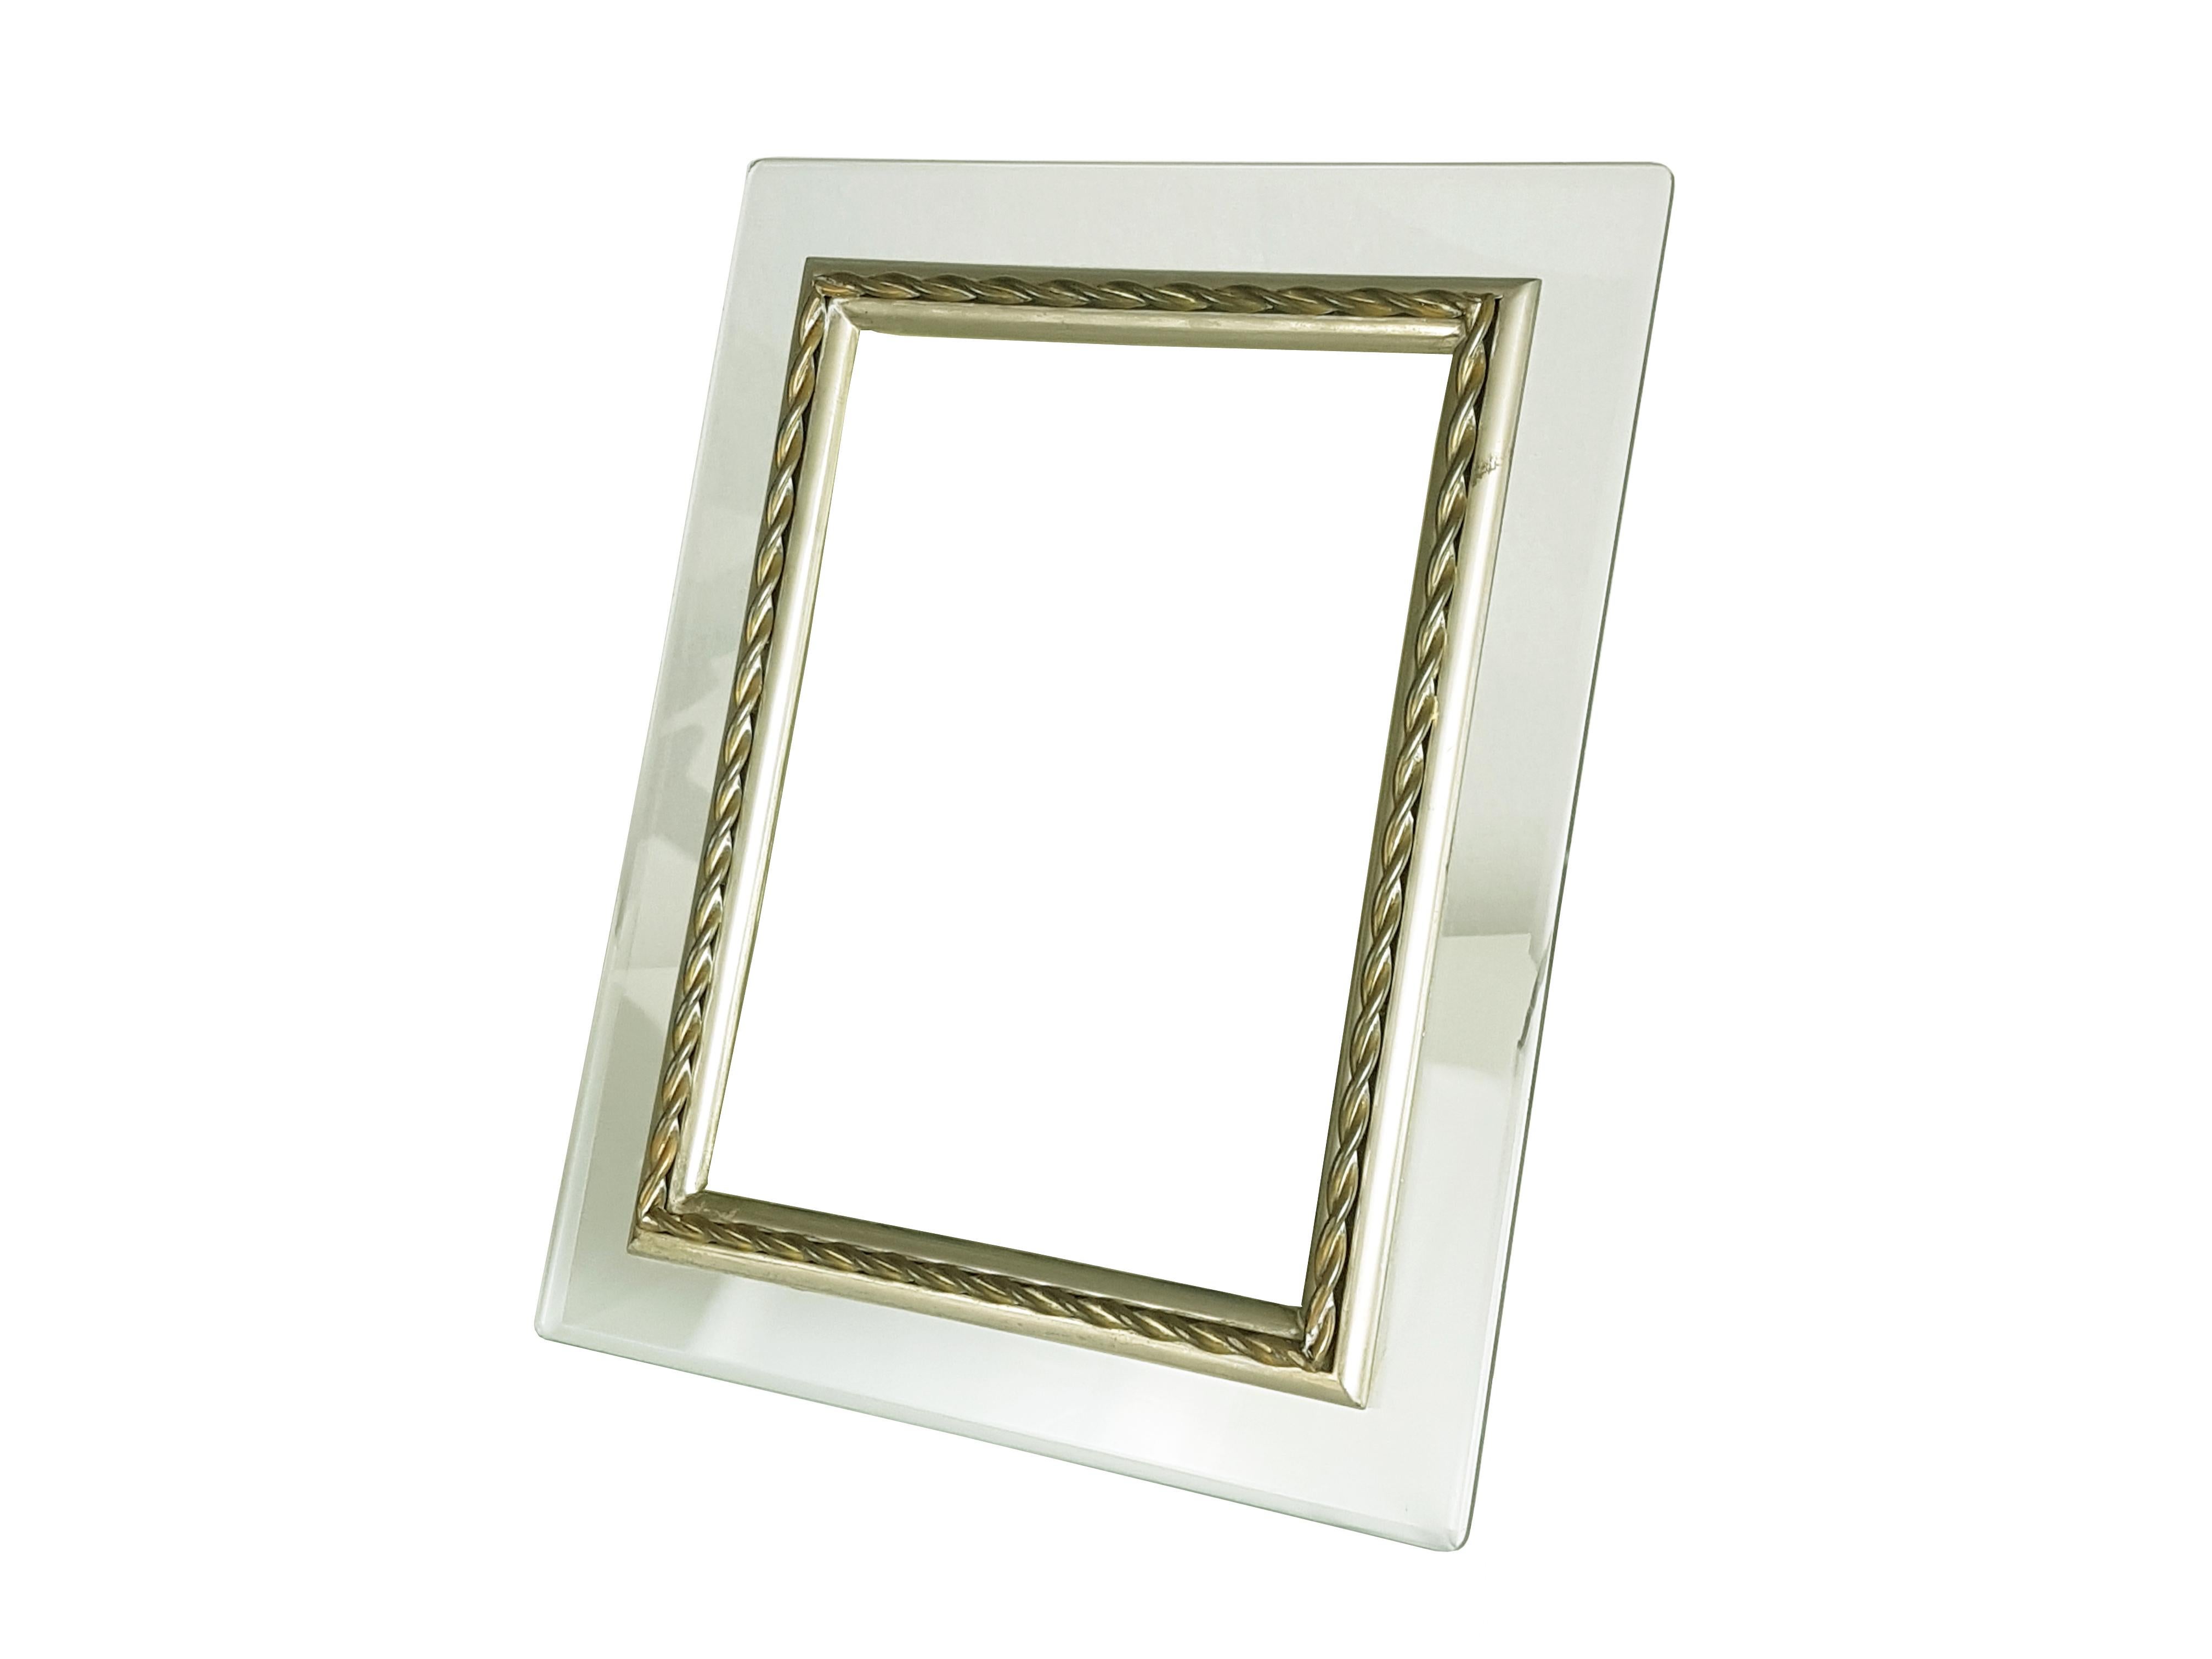 Set of 2 picture frames. They are made in ground glass with and internal decorative nickel-plated & brass frame.
Very good vintage condition: oxidation patina on the metal parts. Light few defect of the glass around some corners.
One corner has